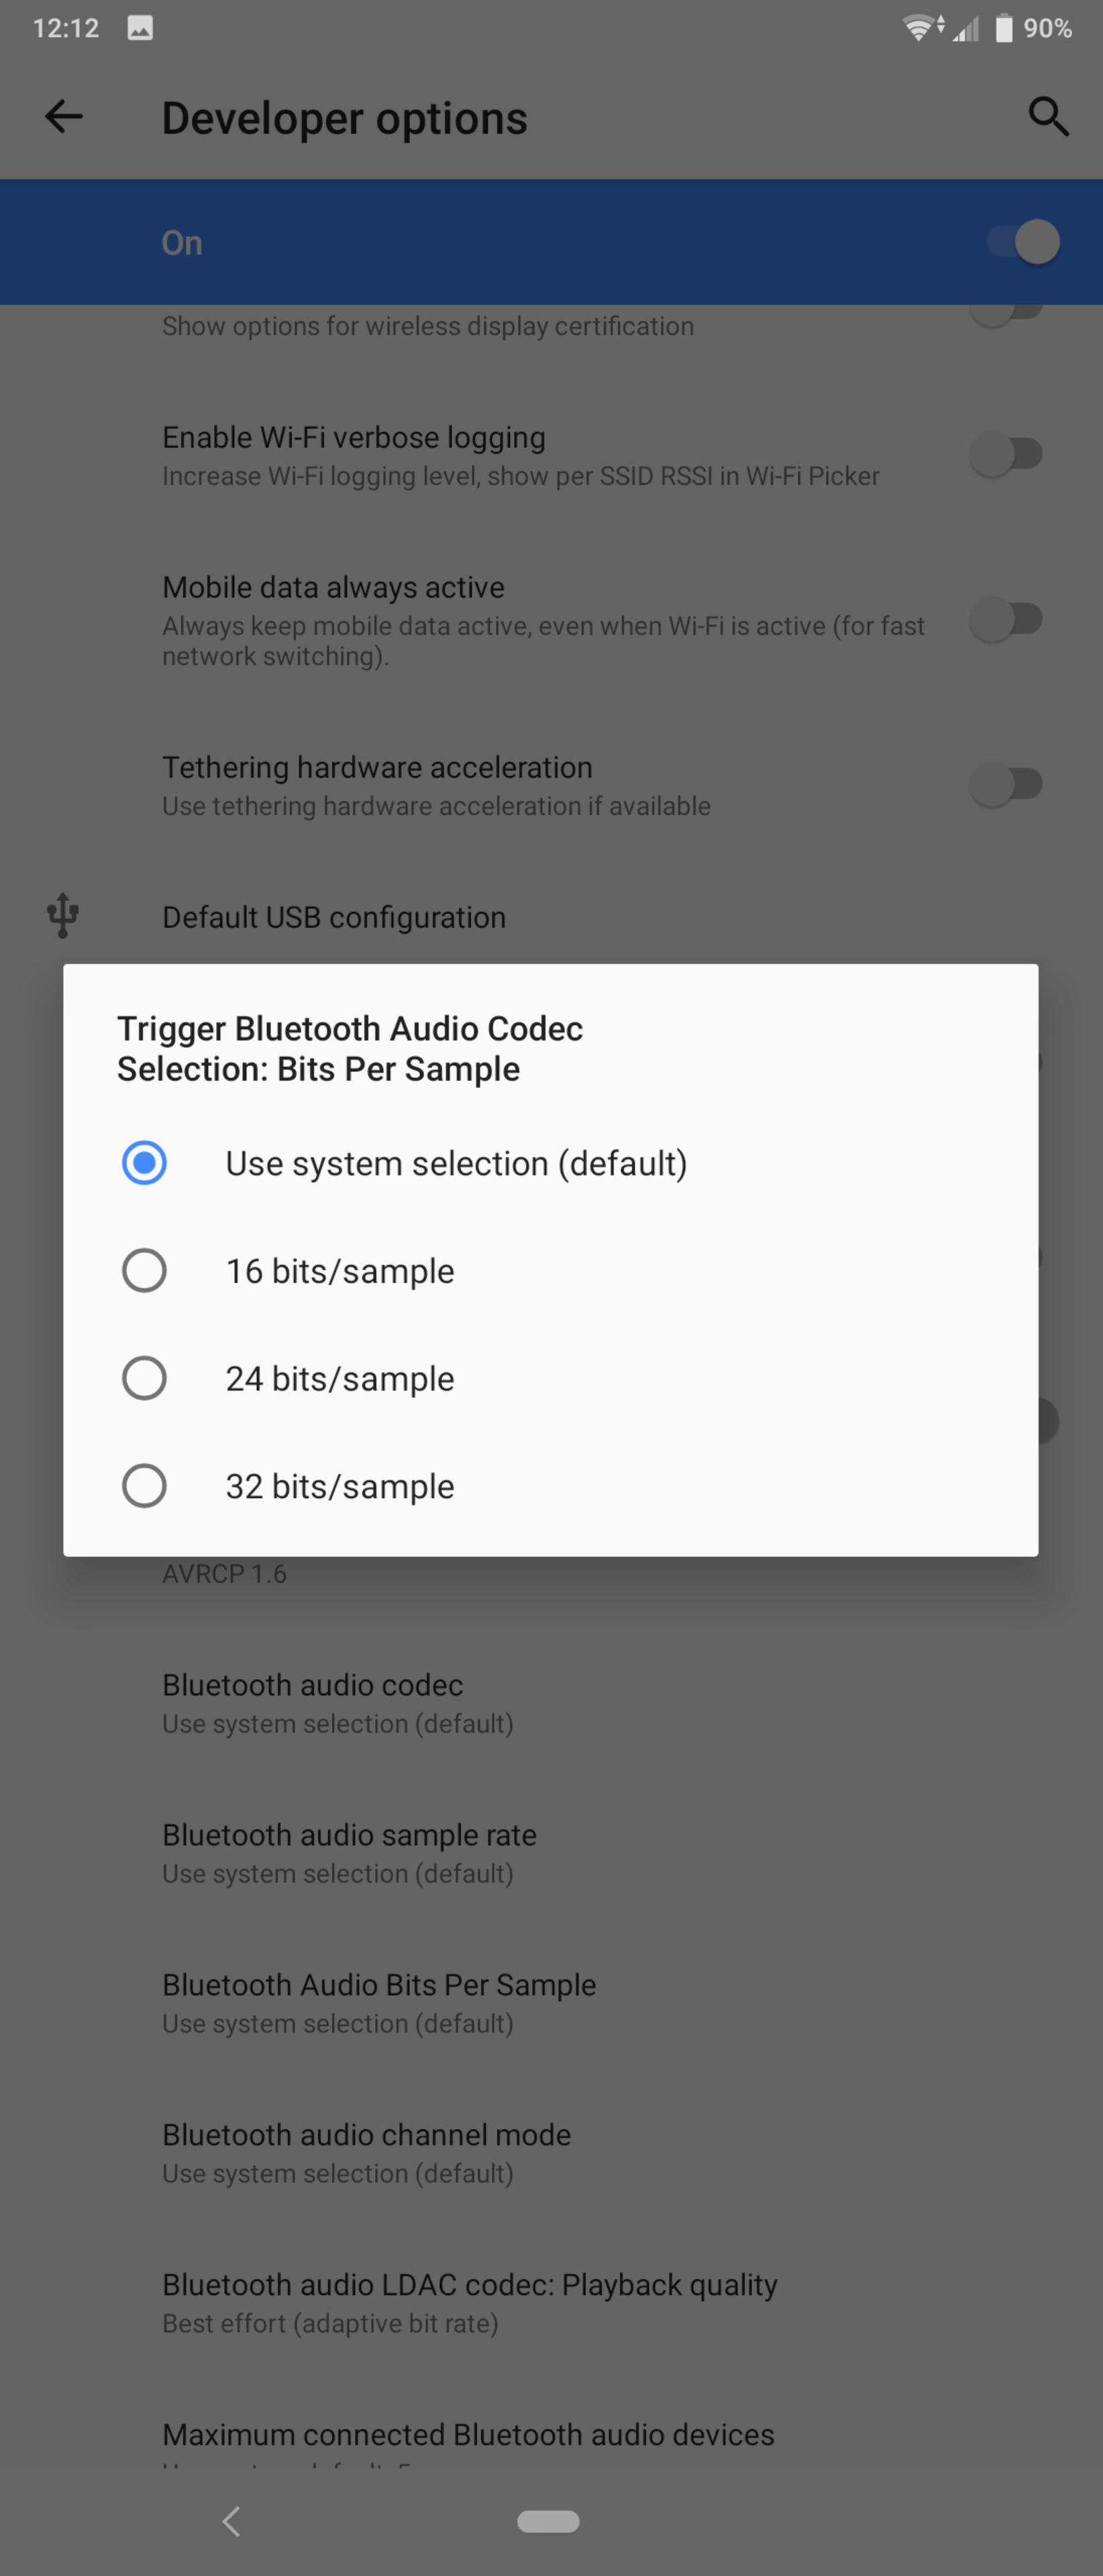 aptx HD support for Galaxy Note 9 - Page 10 - Samsung Community